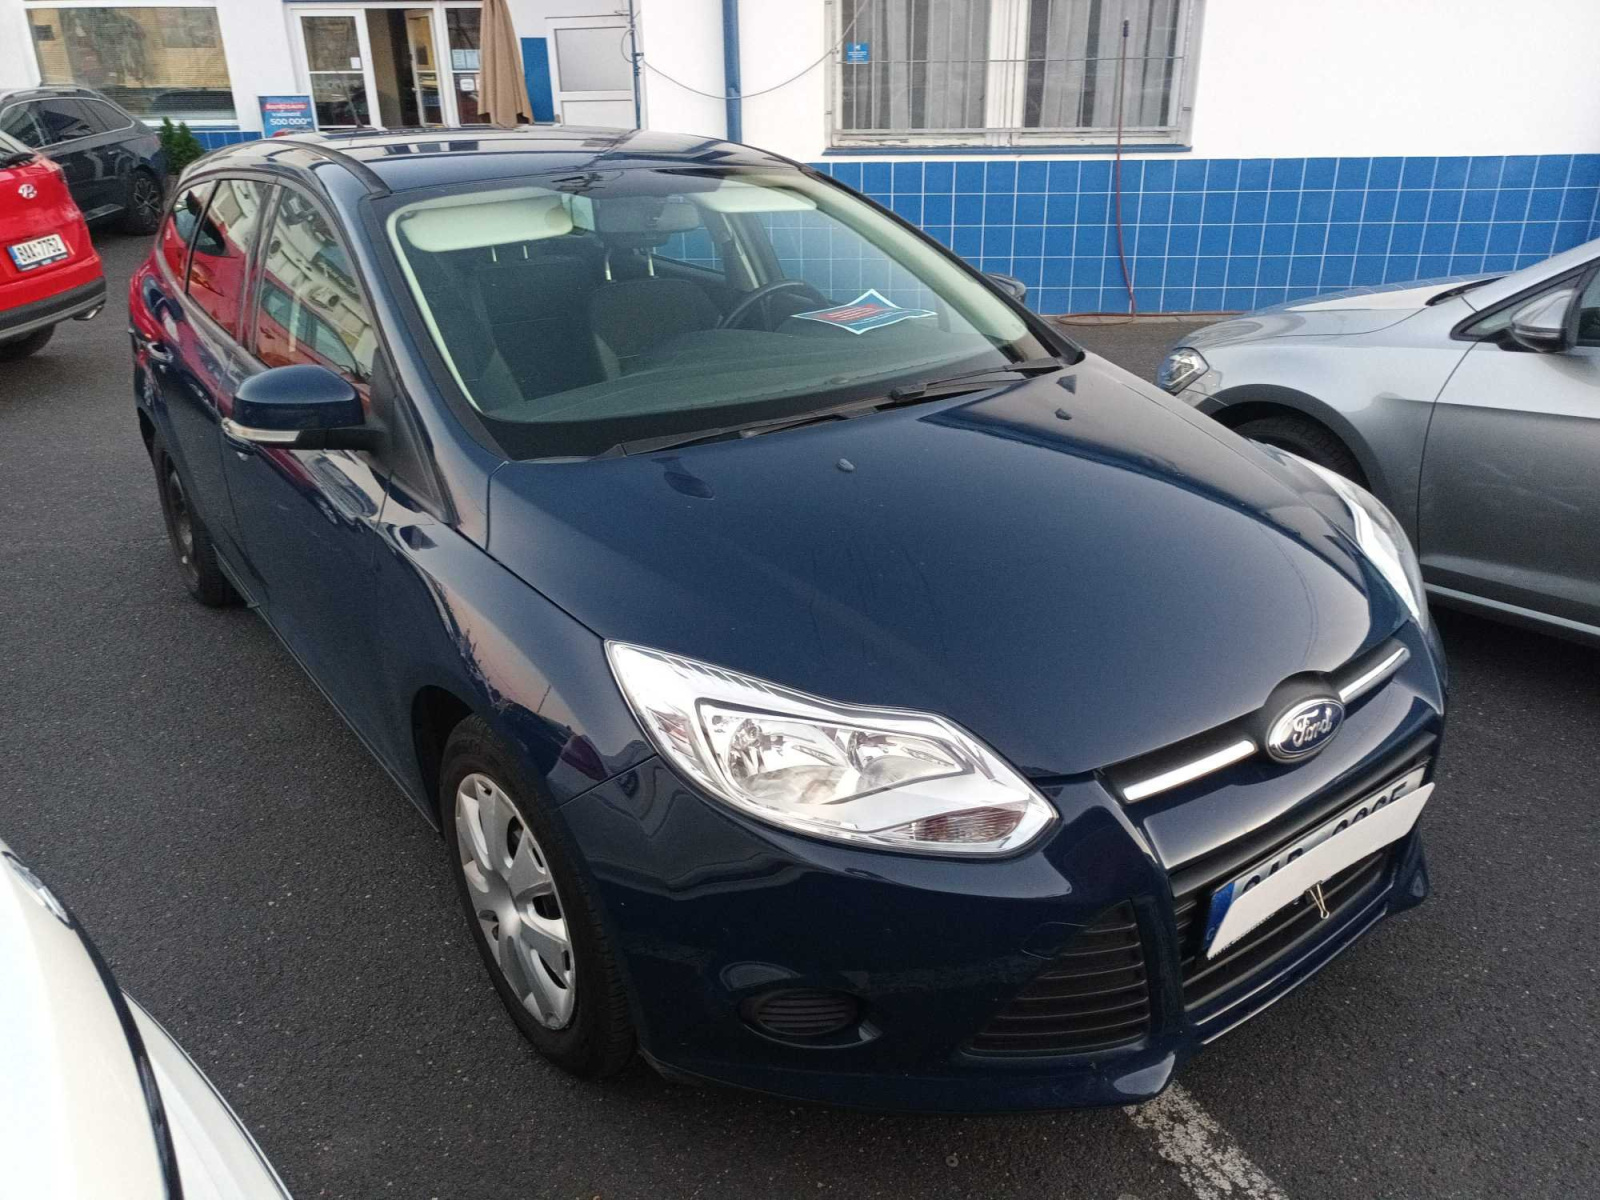 Ford Focus, 2012, 1.6 i, 77kW